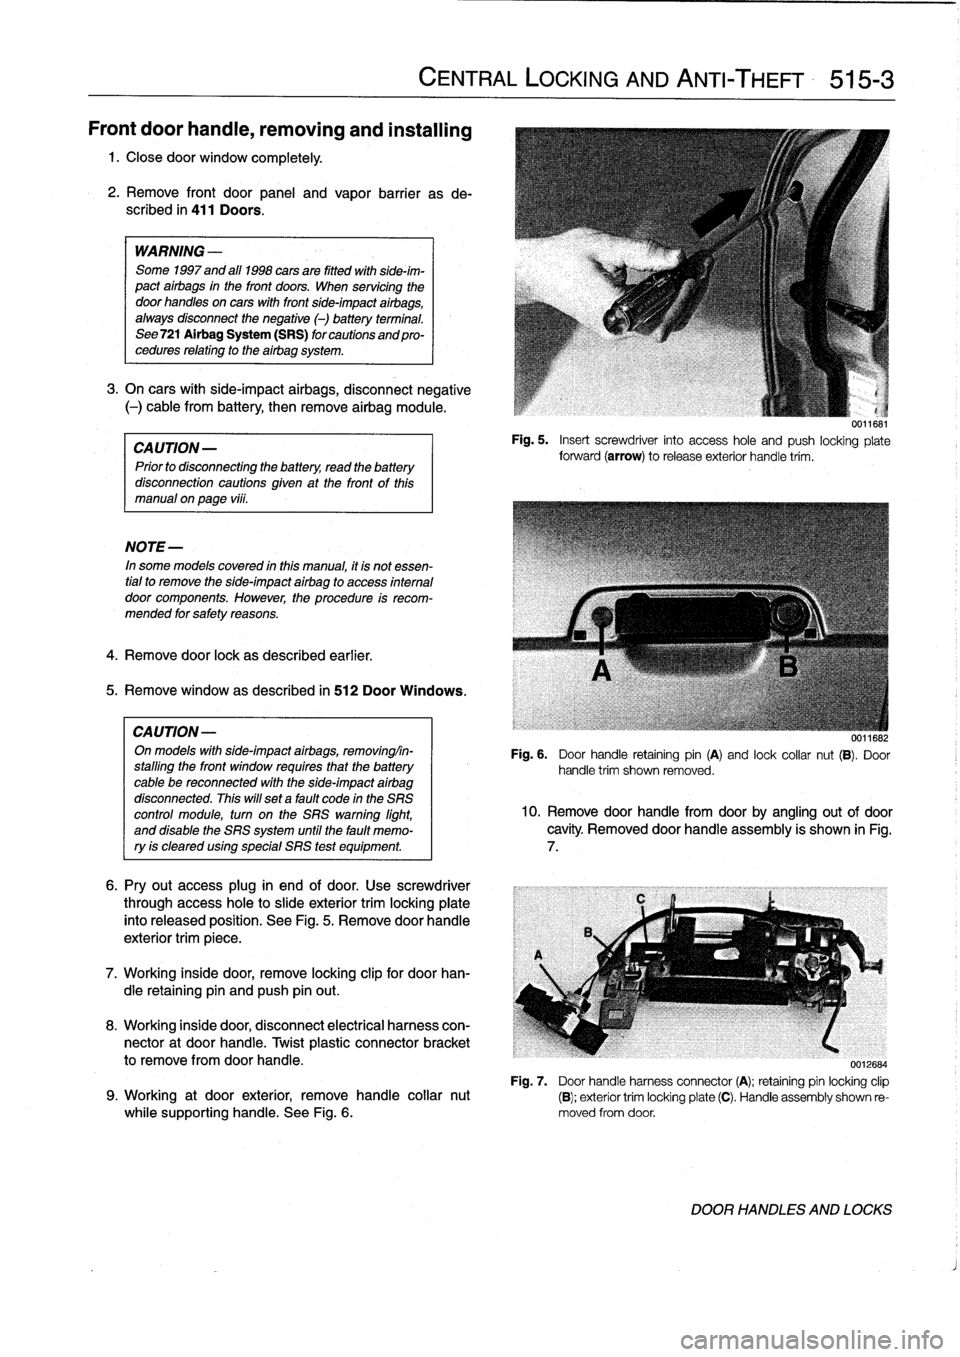 BMW 318i 1998 E36 Owners Manual 
Front
door
handle,
removing
and
installing

1
.
Closedoor
window
completely
.

2
.
Remove
front
door
panel
and
vapor
barrier
asde-
scribed
in
411
Doors
.

WARNING
-

Some
1997
and
al]
1998
cars
are
f